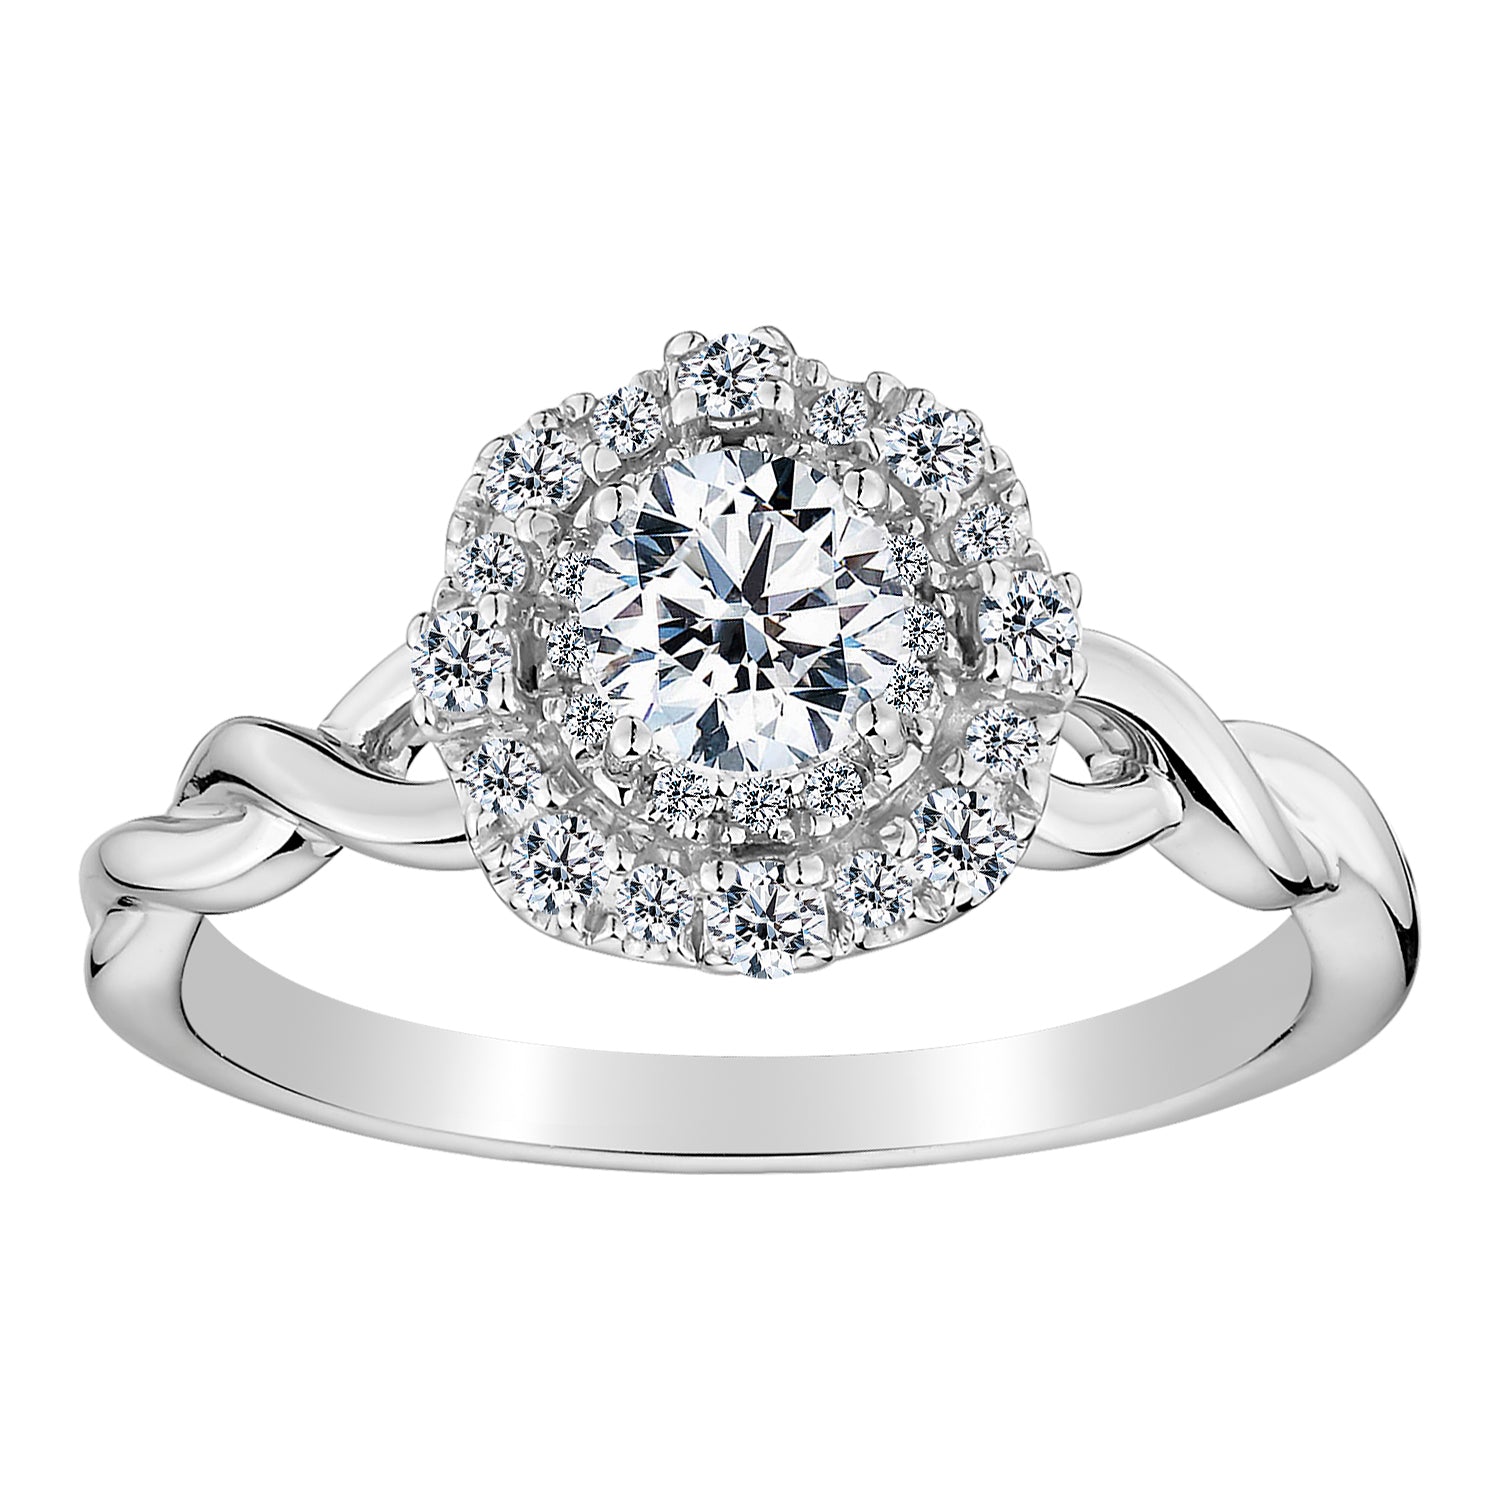 .75 Carat Diamond Engagement Ring, 10kt White Gold - Griffin Jewellery Designs